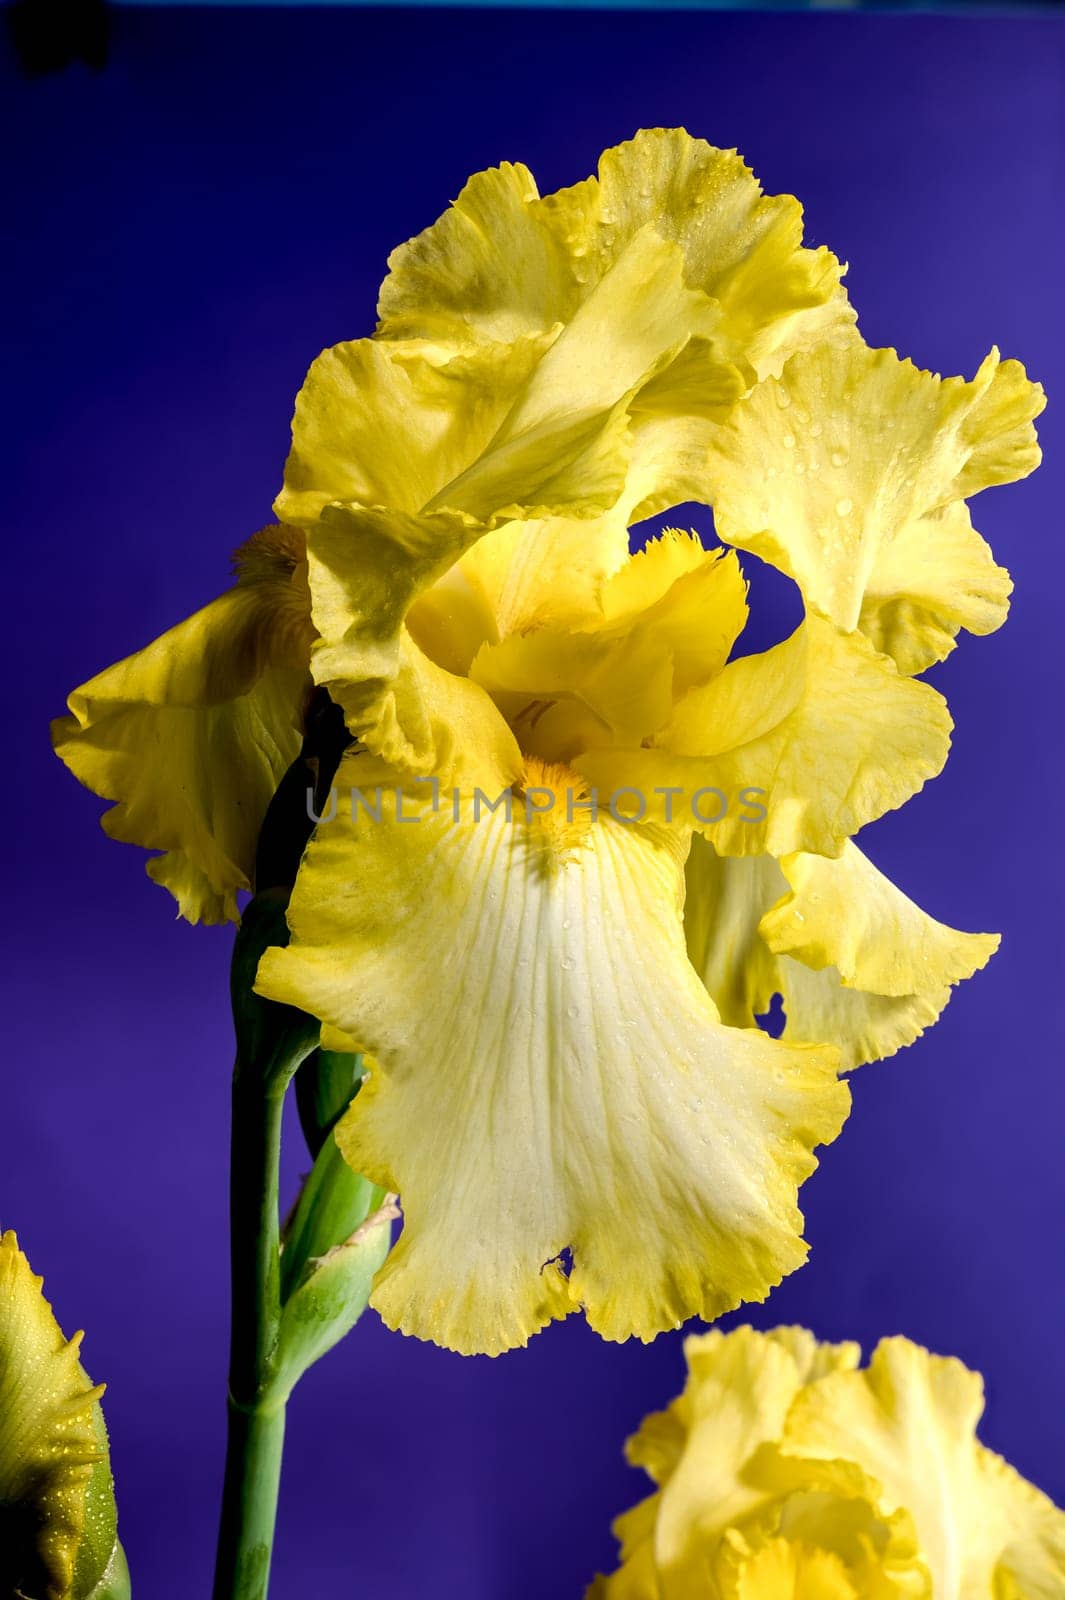 Beautiful Blooming yellow iris flower on a purple background. Flower head close-up.